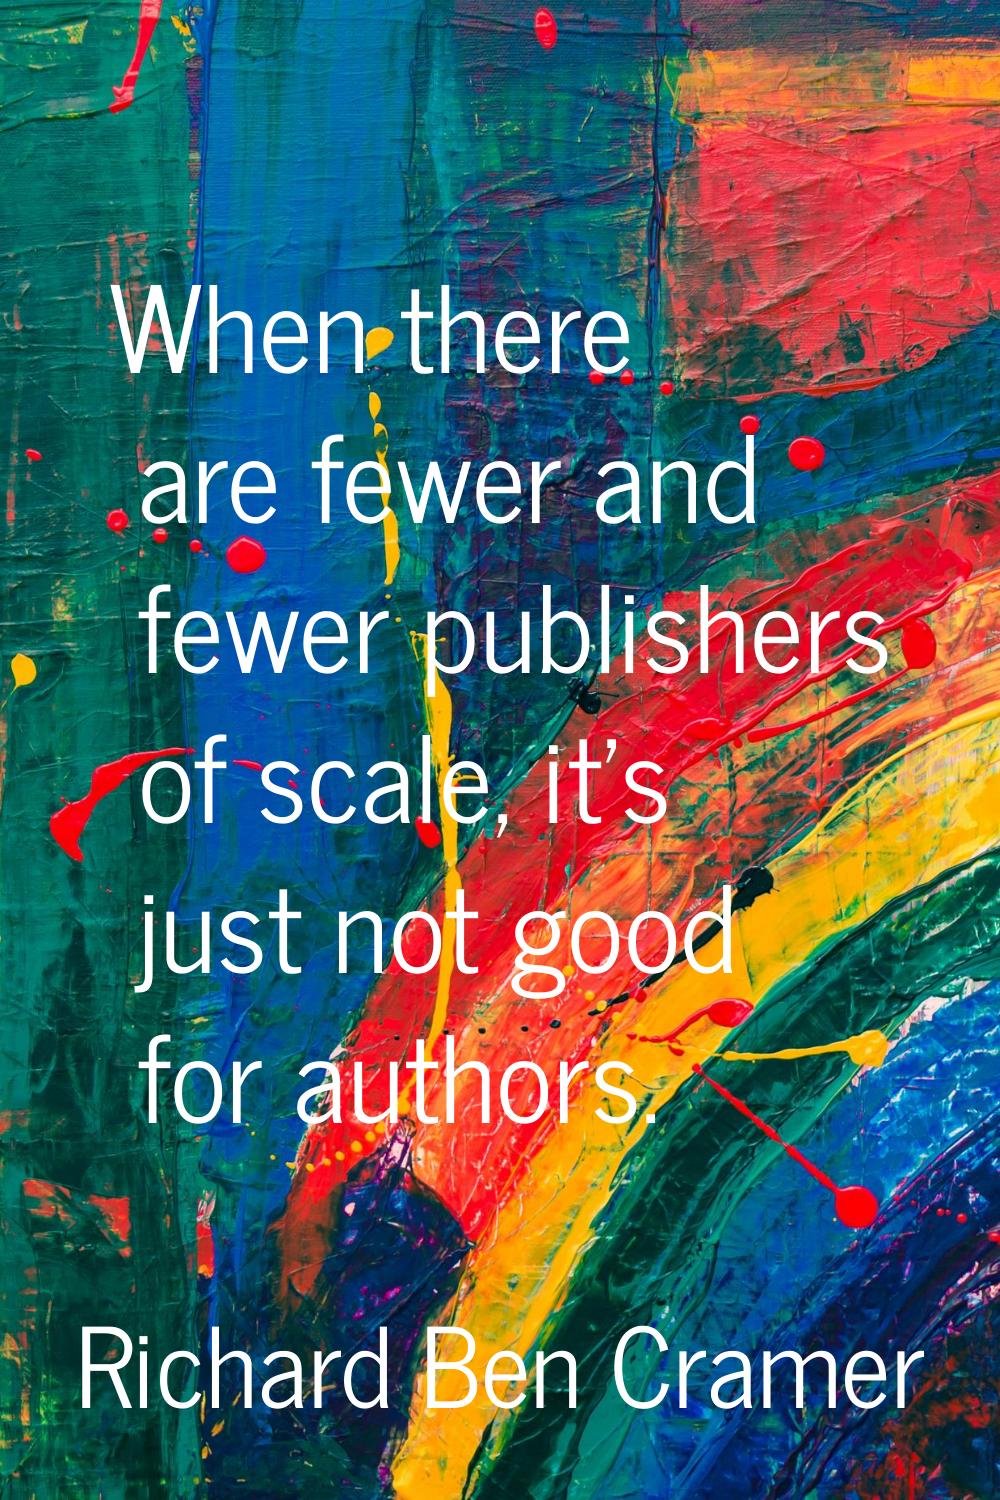 When there are fewer and fewer publishers of scale, it's just not good for authors.